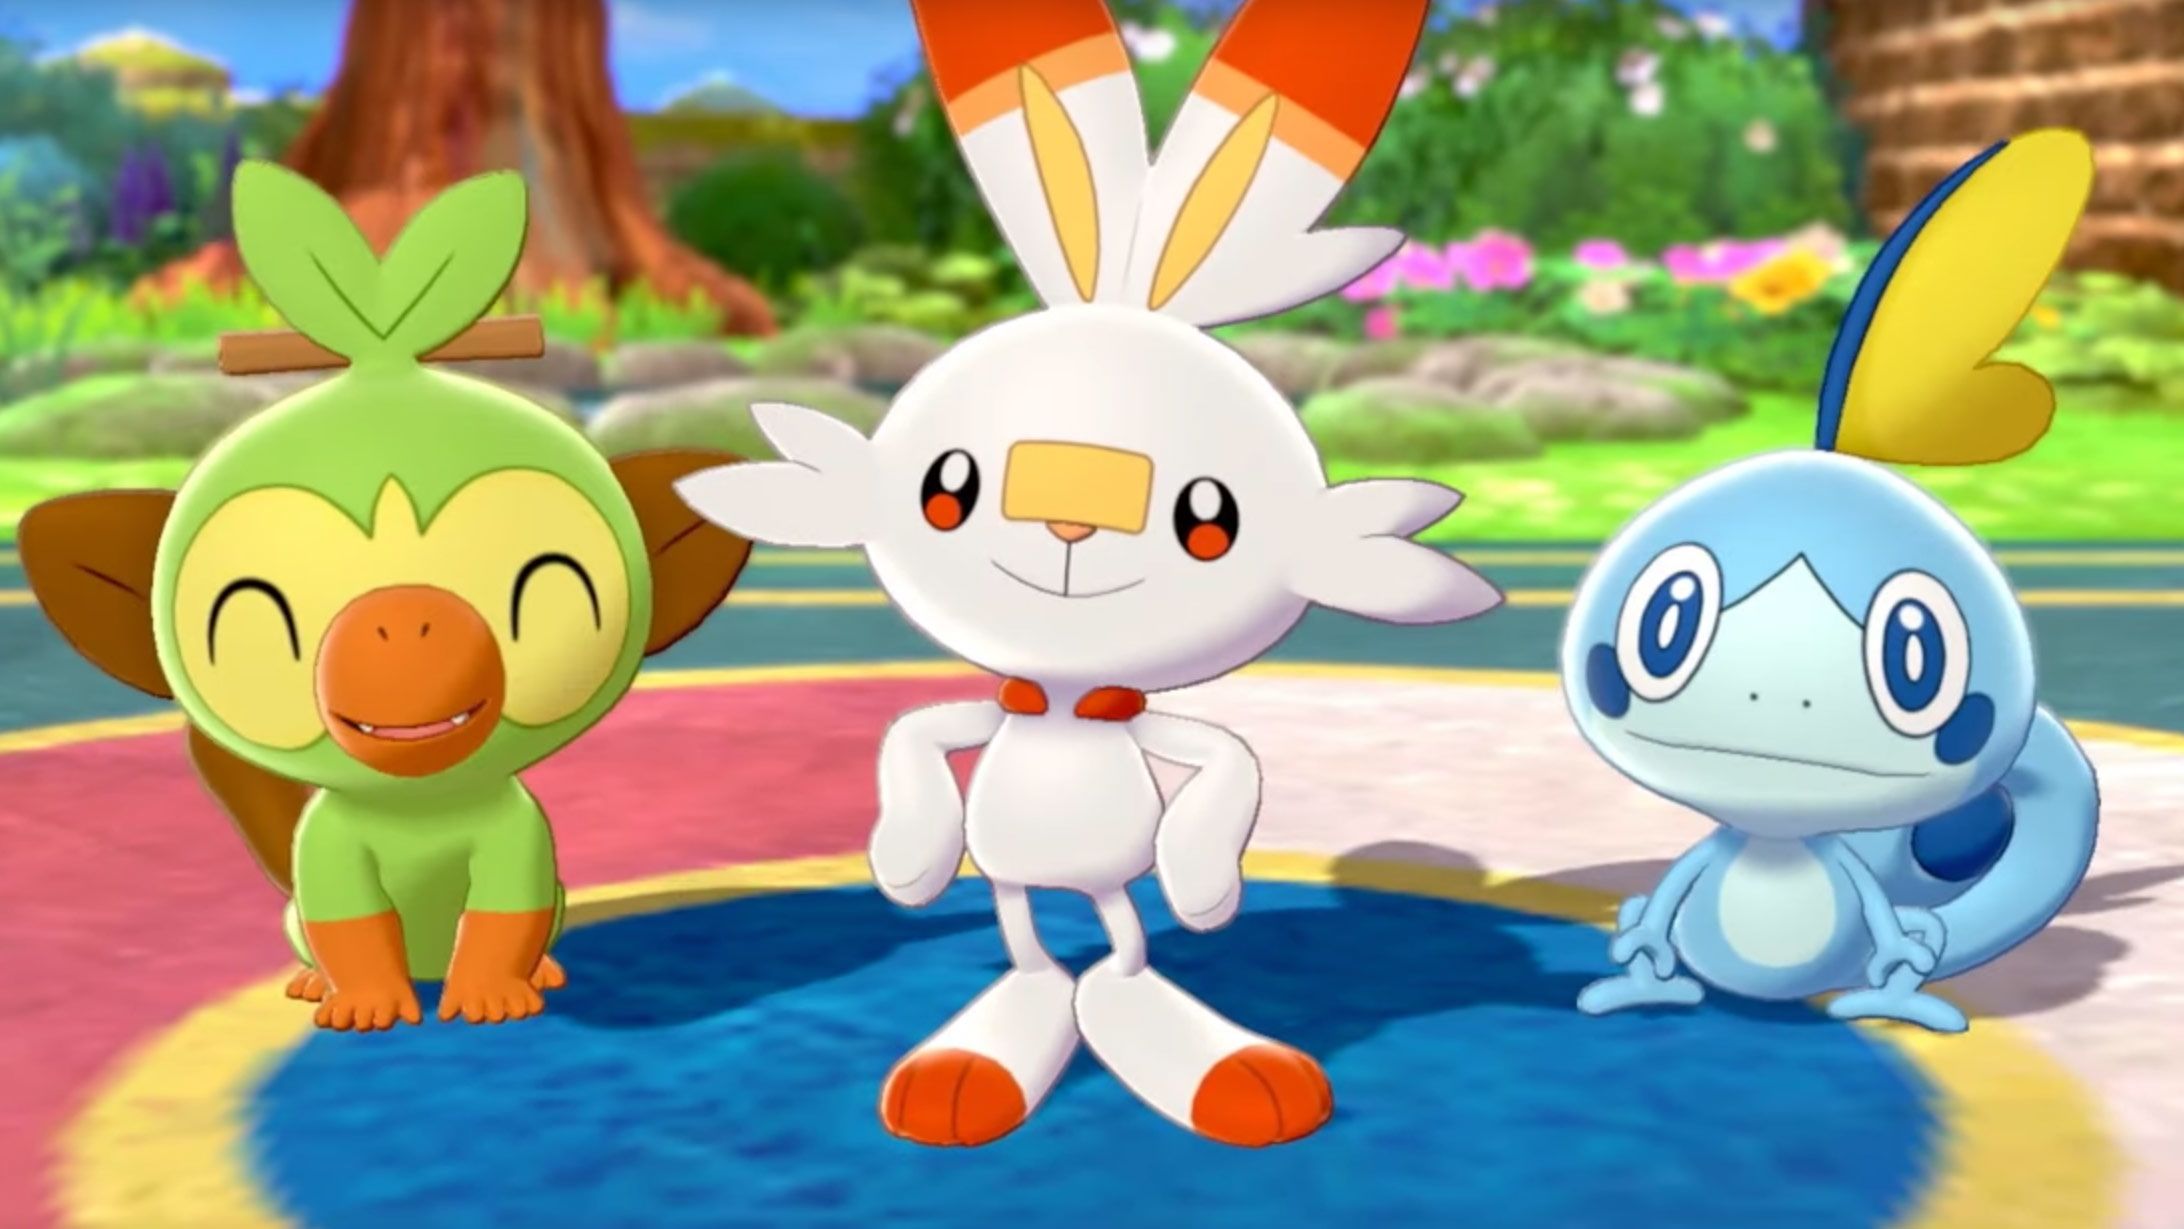 Pokémon Sword and Shield are secretly $10 off on